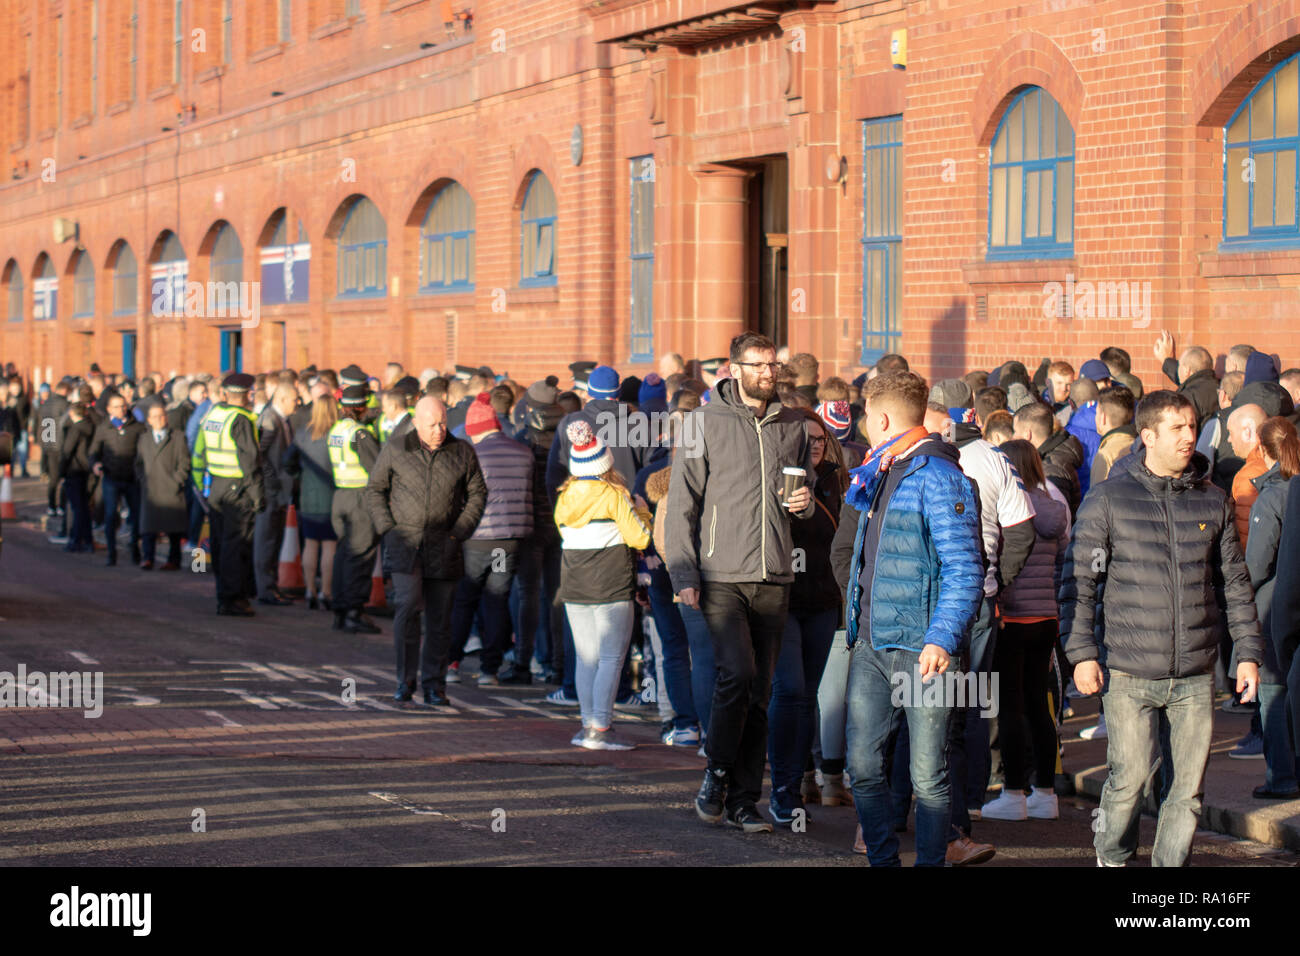 Glasgow, Scotland, UK. 29th December, 2018. Rangers have won 1-0 at full-time, at home at Ibrox Stadium, with a goal scored by Jack (30 minutes). Earlier, despite a massive police presence, smoke bombs were thrown during the arrival of the Celtic team bus. Amidst rising tensions, fans were being kept apart prior to kick-off at 12:30, as well as after the match. Police officers were seen filming the crowds outside the ground. Iain McGuinness / Alamy Live News Stock Photo